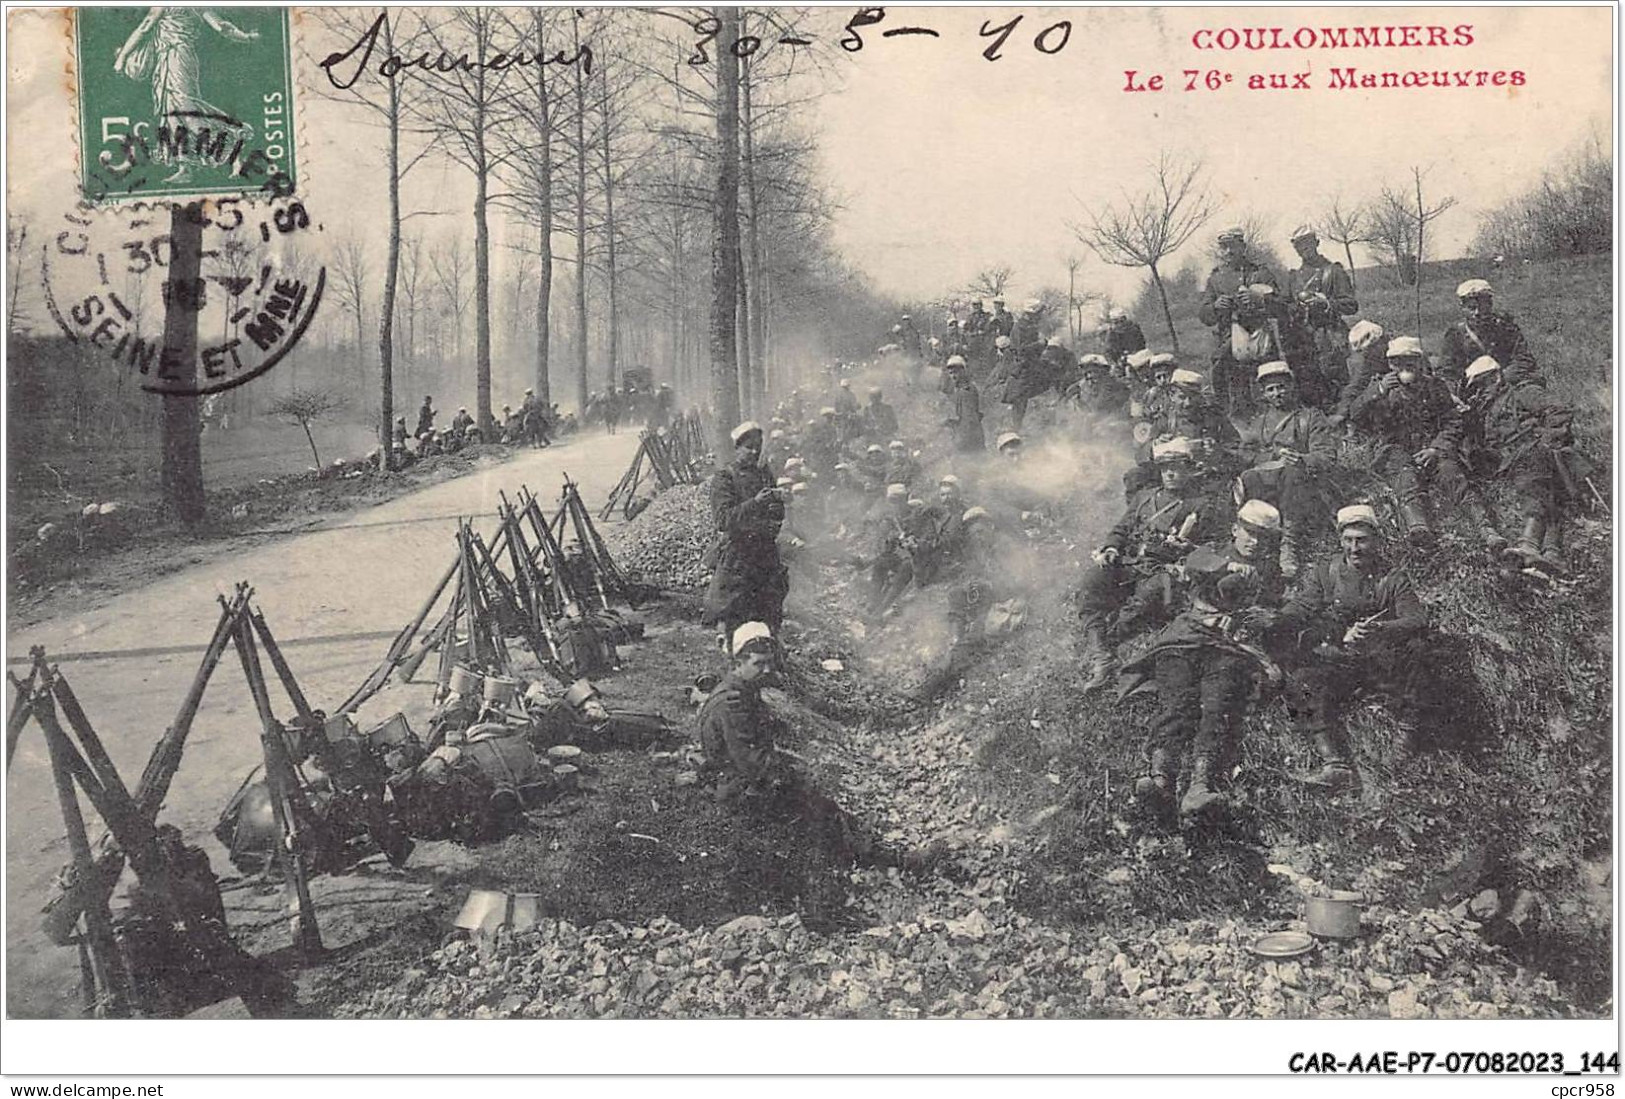 CAR-AAEP7-77-0693 - COULOMMIERS - LE 76e Aux Manoeuvres - Coulommiers